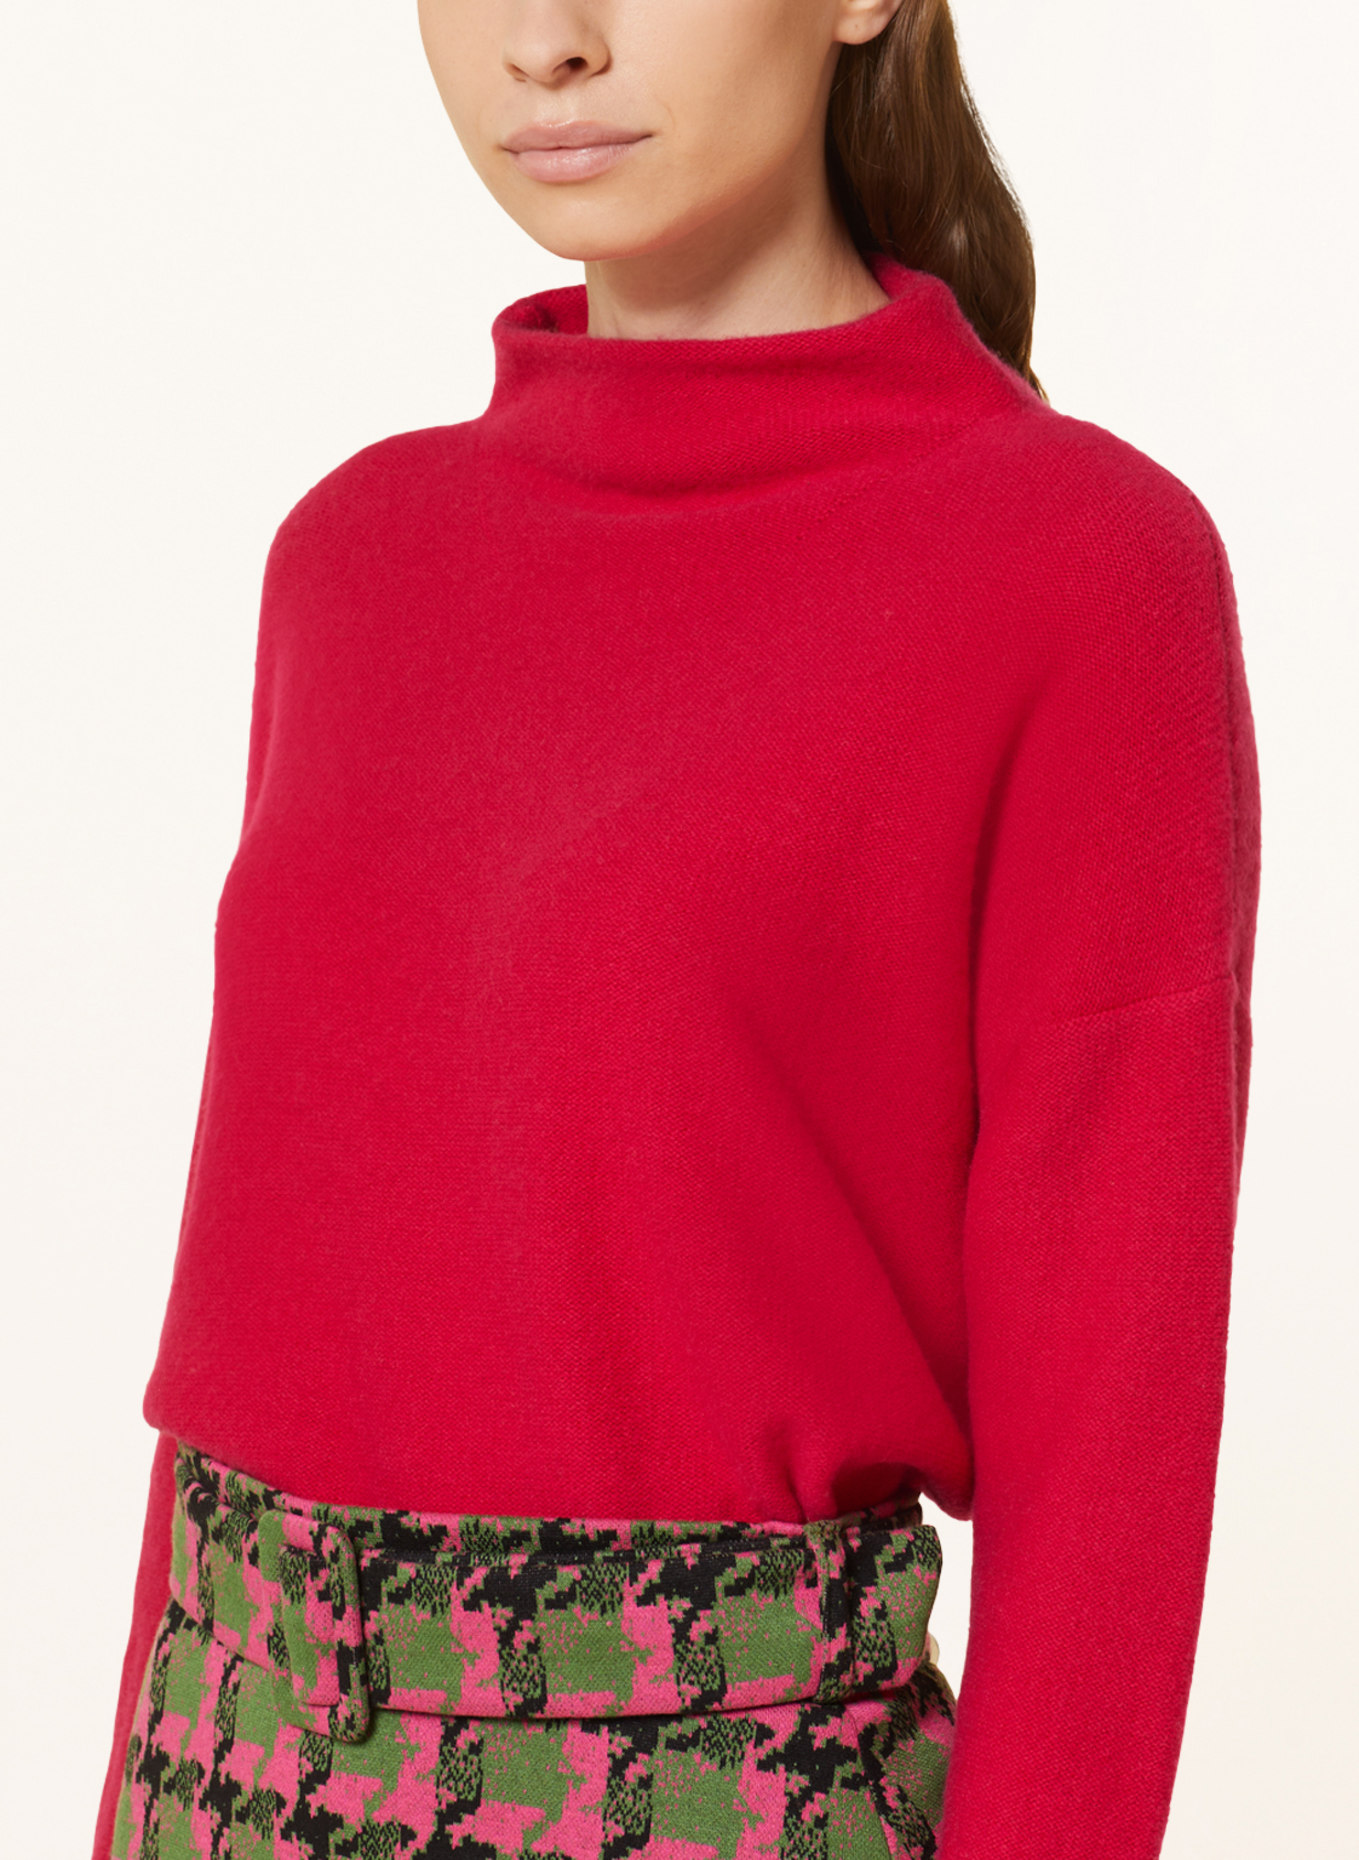 SEM PER LEI Sweater with cashmere, Color: PINK (Image 4)